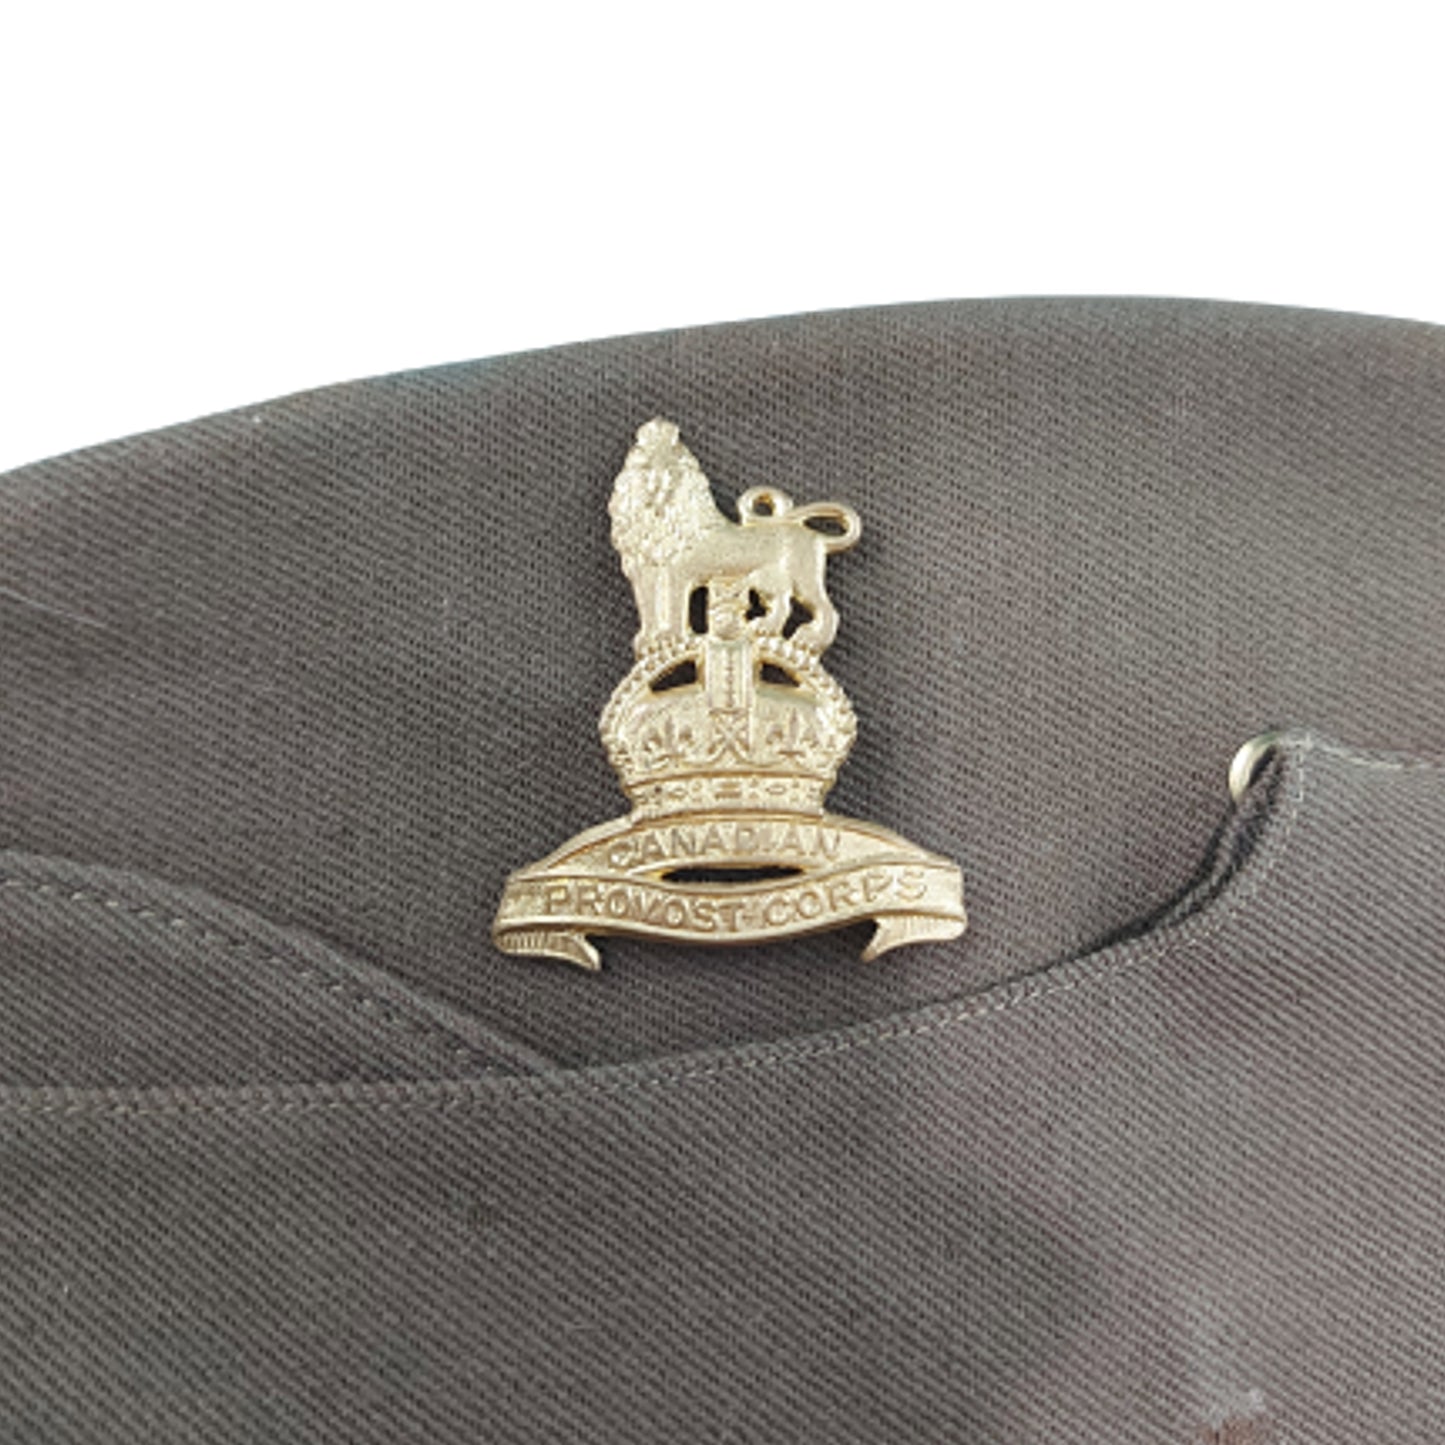 WW2 Canadian Provost Corps Wedge Cap With Badge 1944